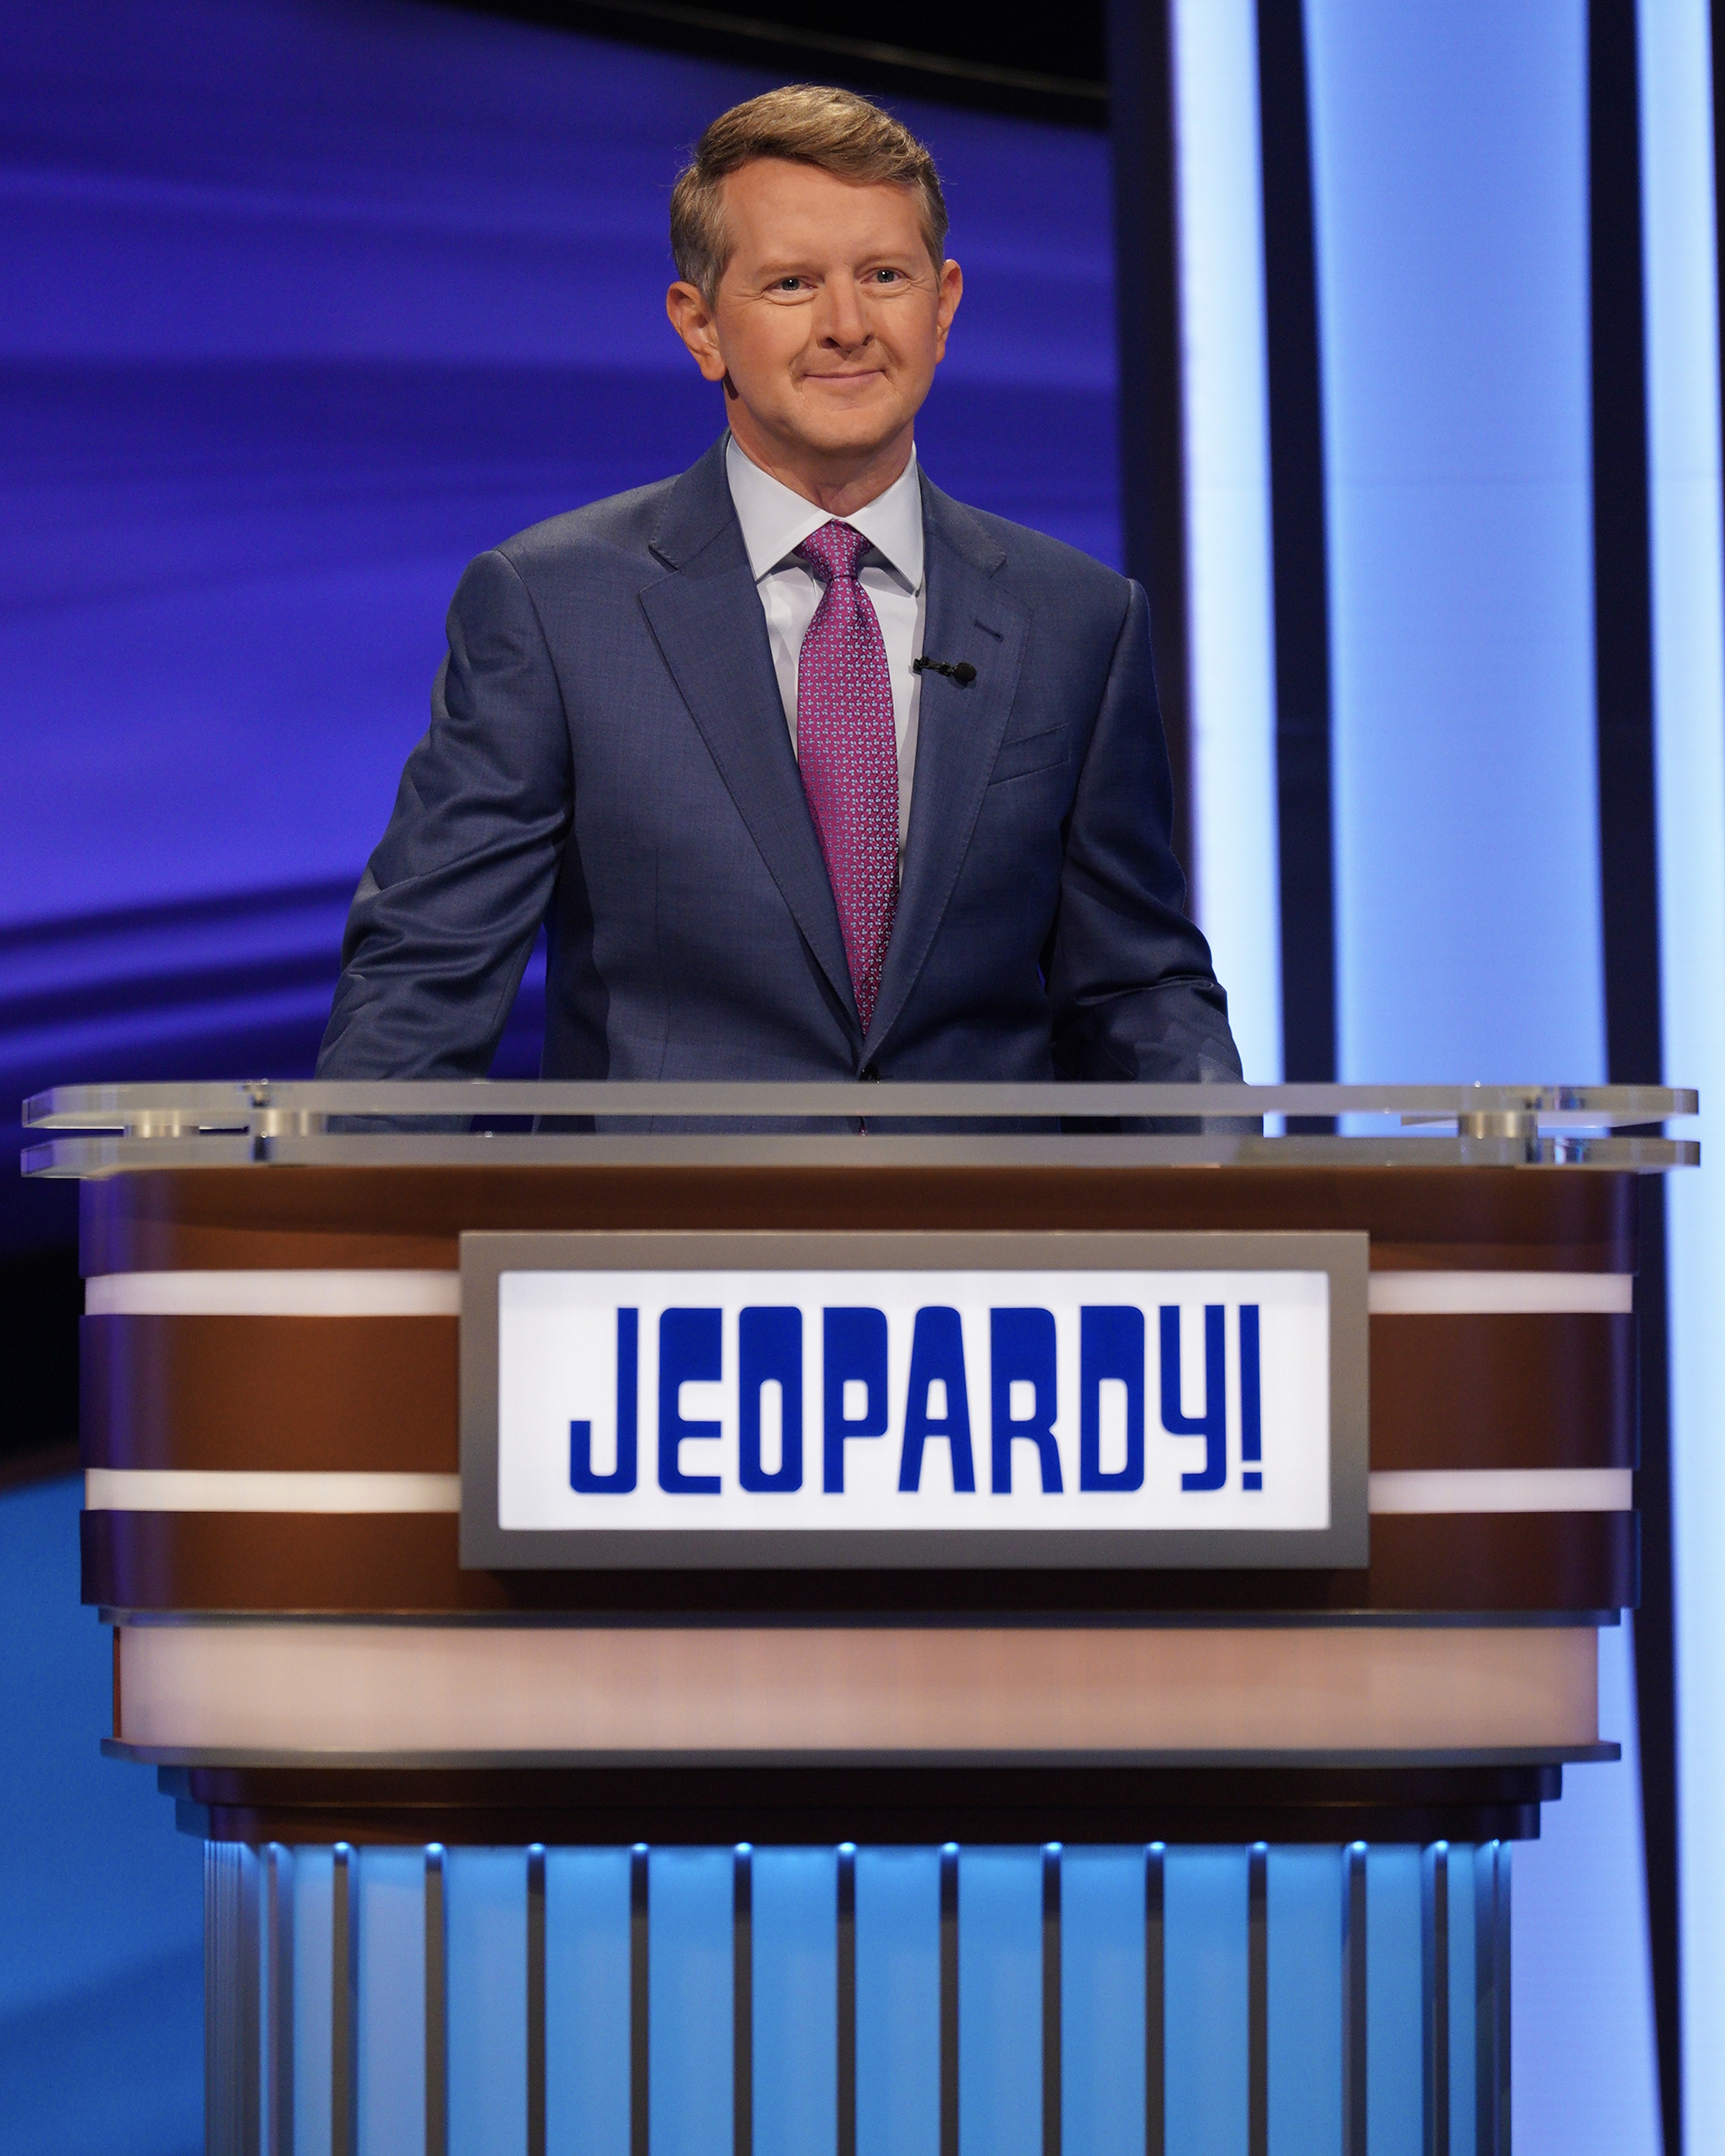 Ken in a suit and tie on Jeopardy